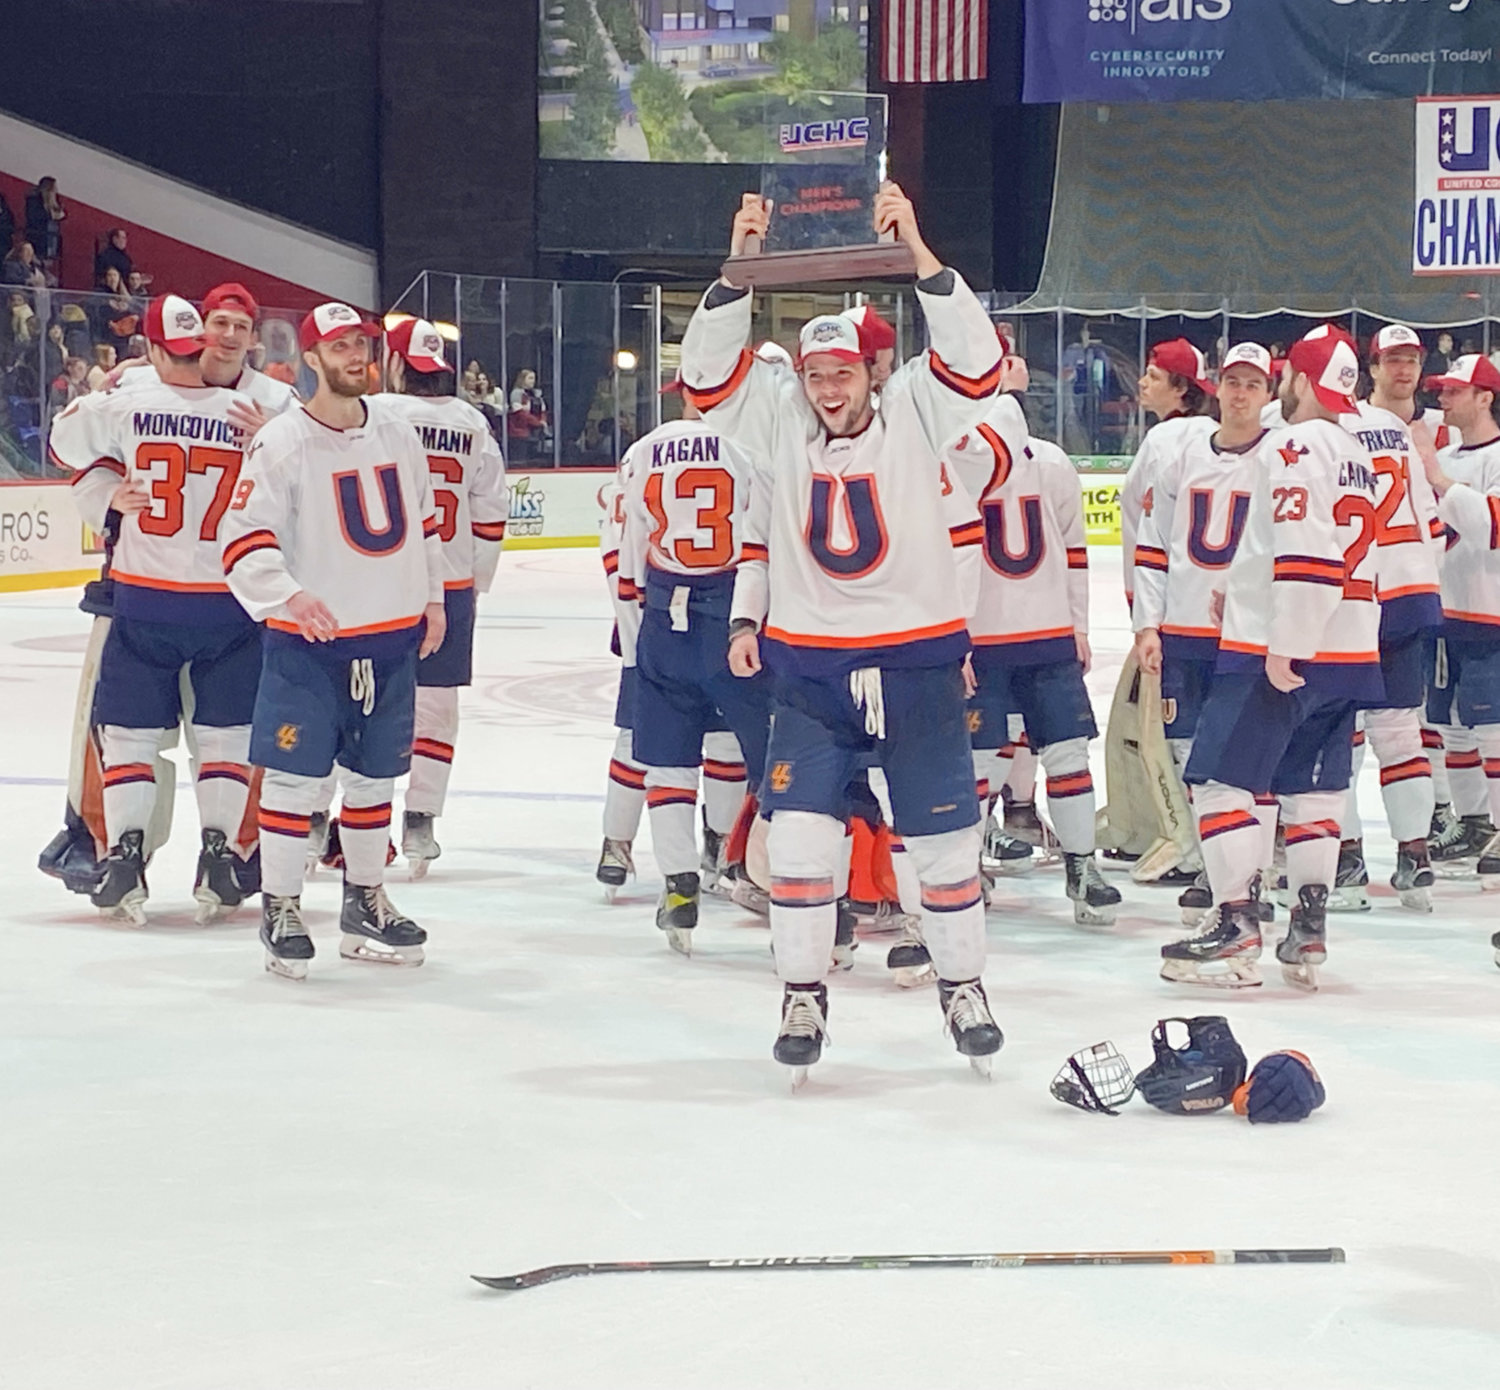 The Utica University men's hockey team celebrates with the United Collegiate Hockey Conference  trophy after topping Nazareth 5-3 in the conference final on Saturday in Utica. It is the second time in as many seasons Utica has won the conference title.